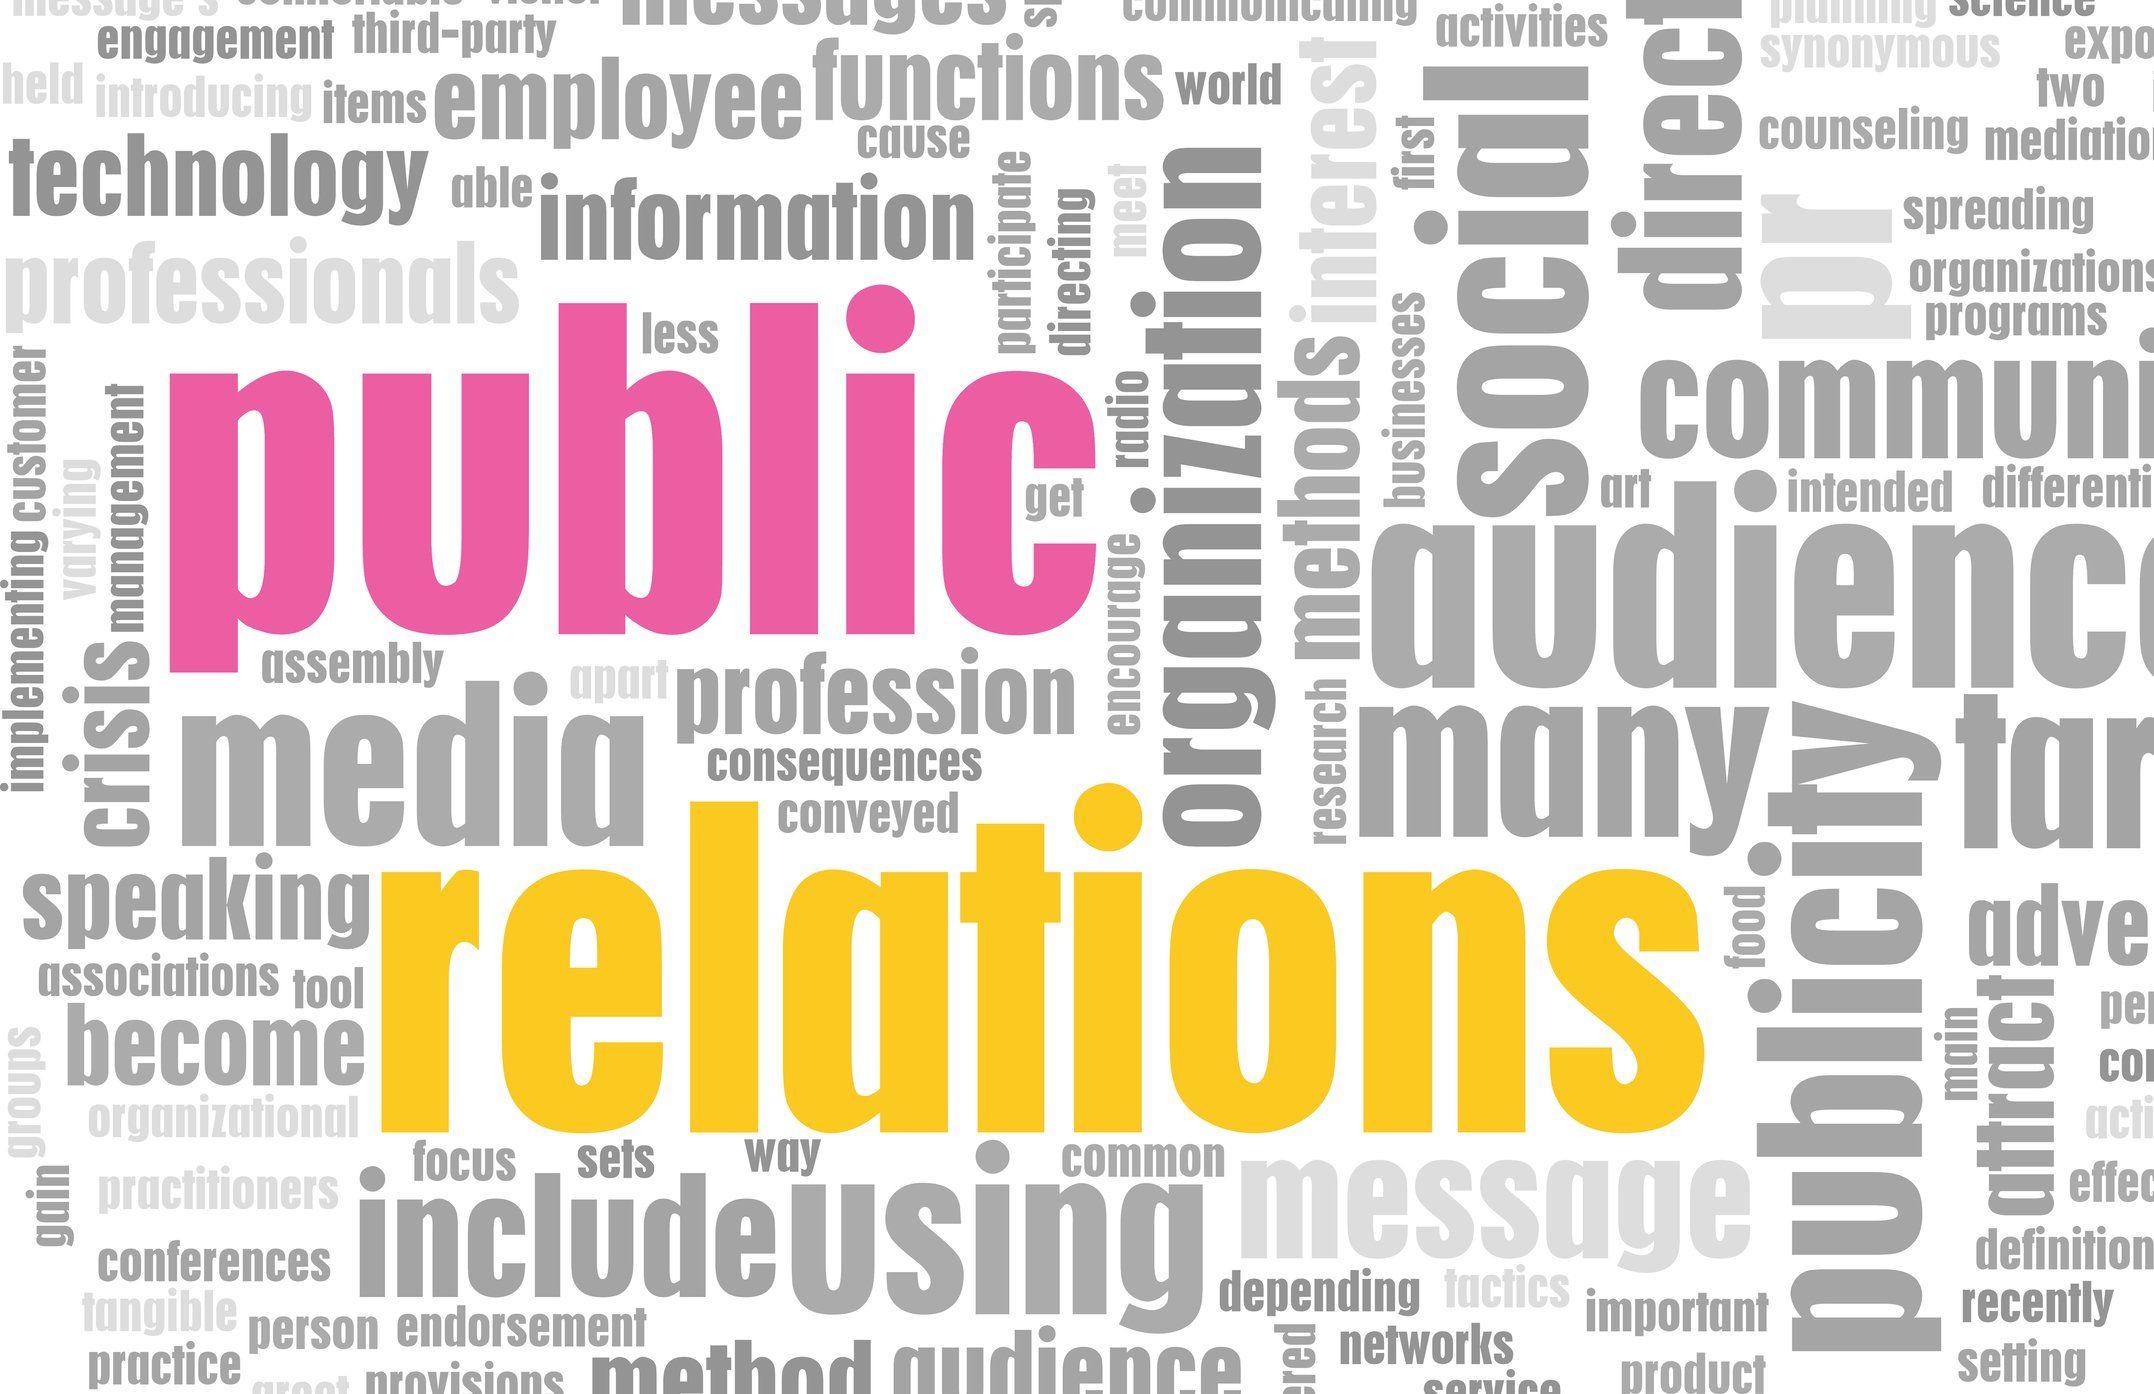 Out of college and looking to jumpstart your career in public relations? Check out these 5 tips from the Fruition PR team.